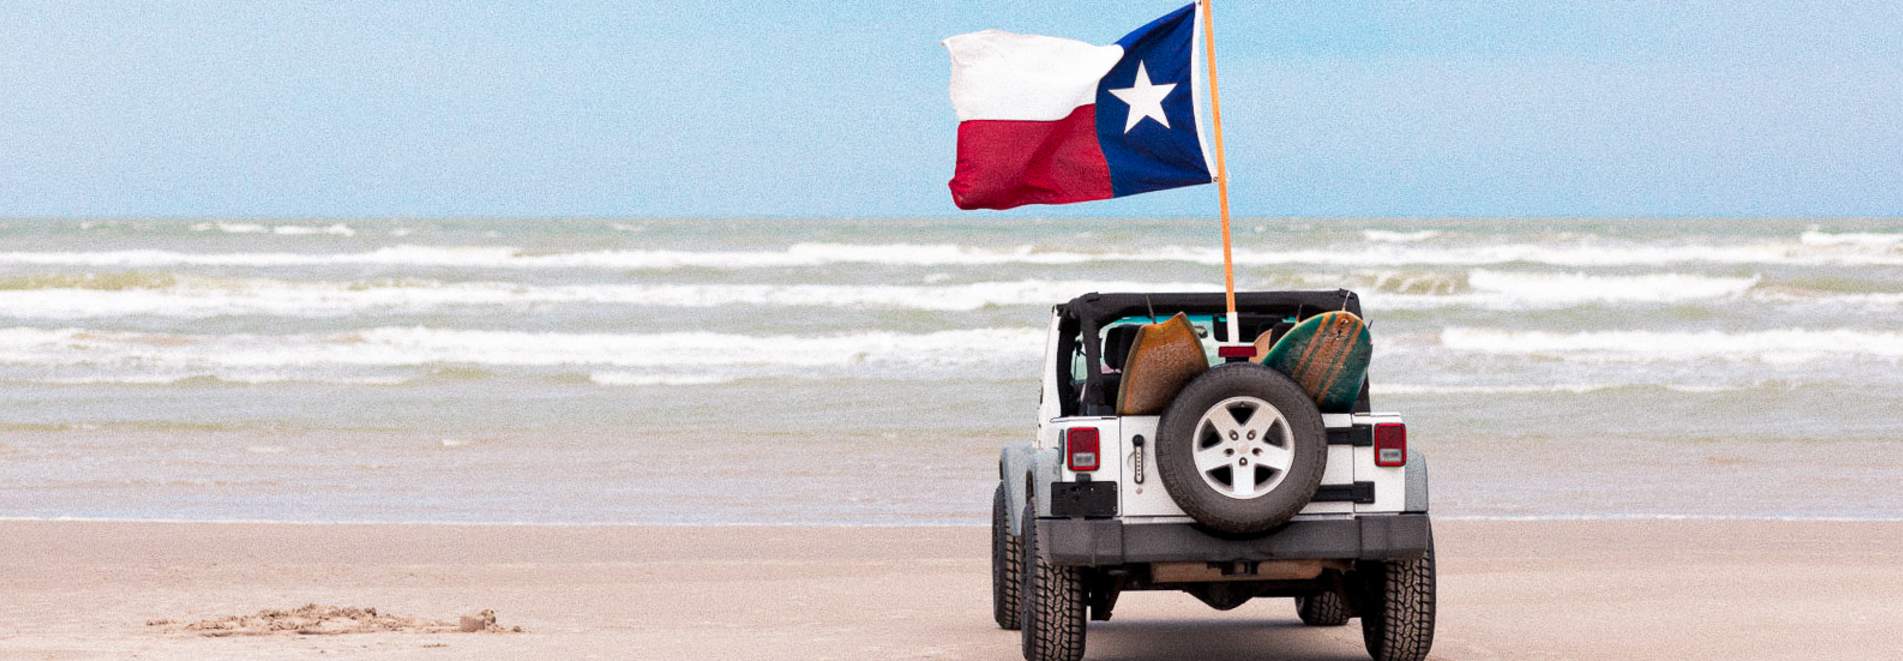 Beach Jeep with Texas flag Lifestyle Photography from K2 Productions